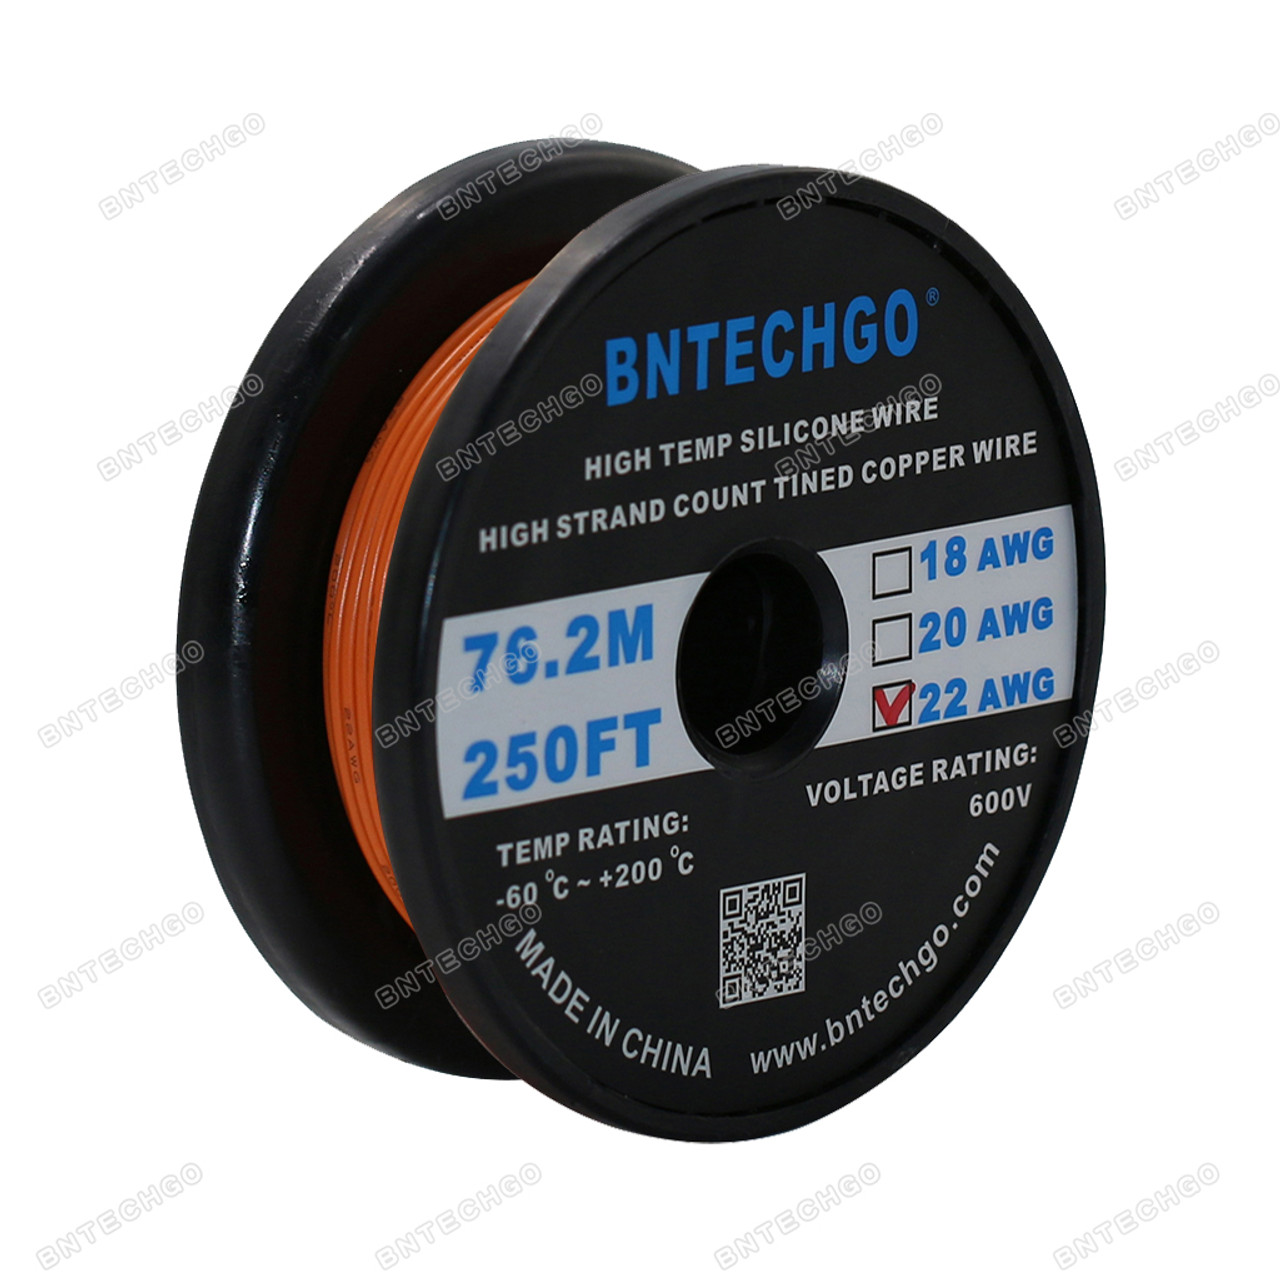 6 gauge silicone wire spool red and black 20 feet ultra flexible soft